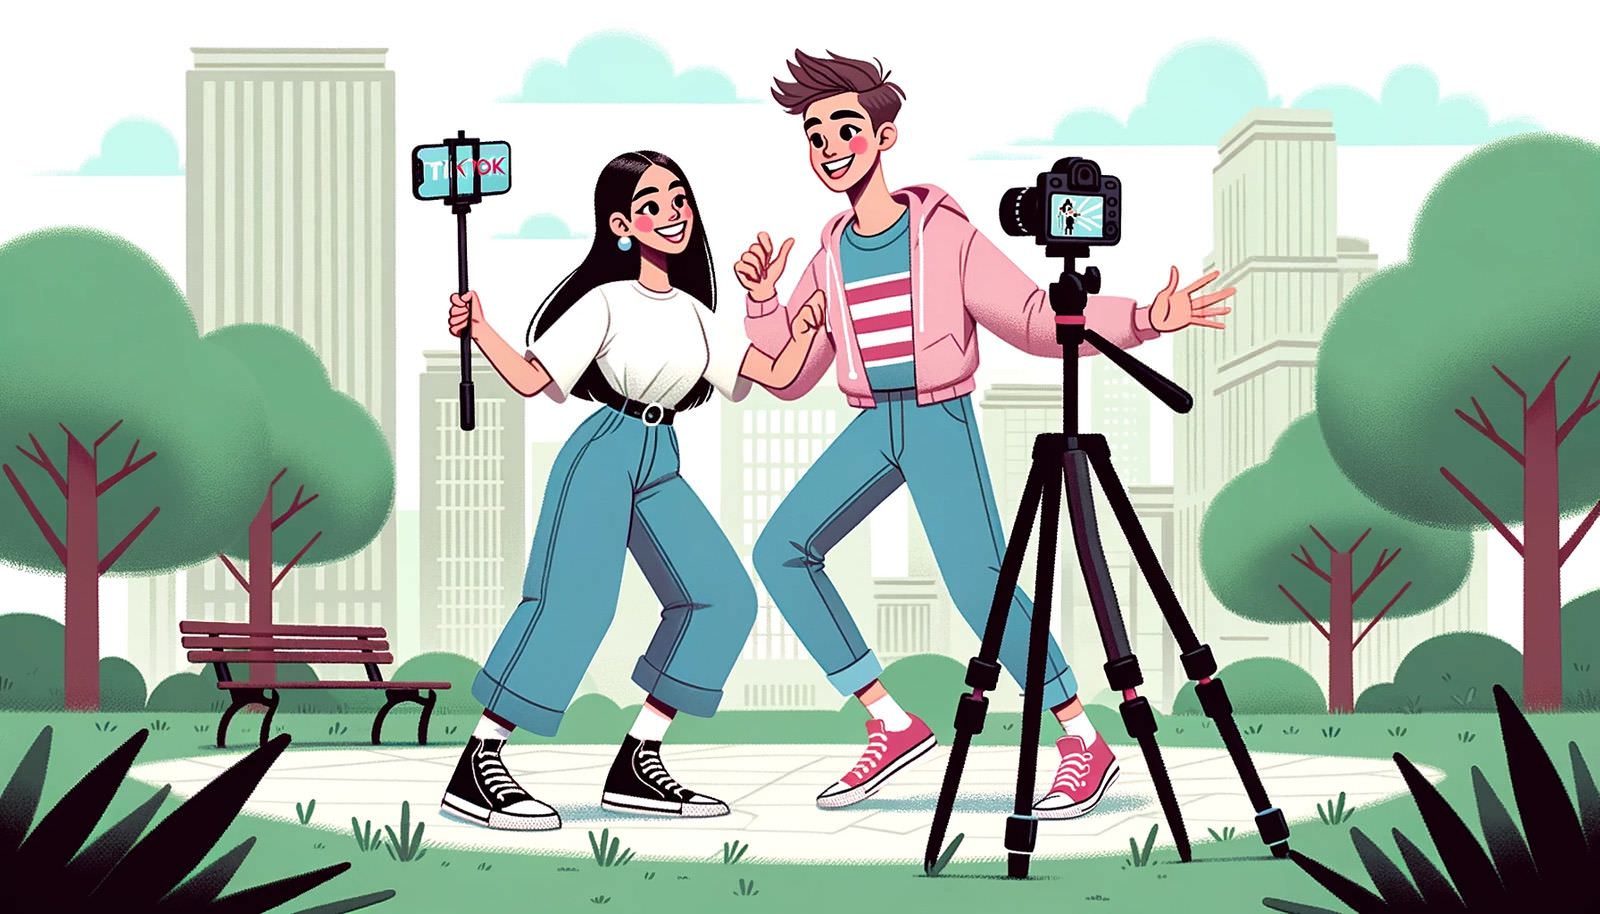 Animation of people using tiktok and videoing it